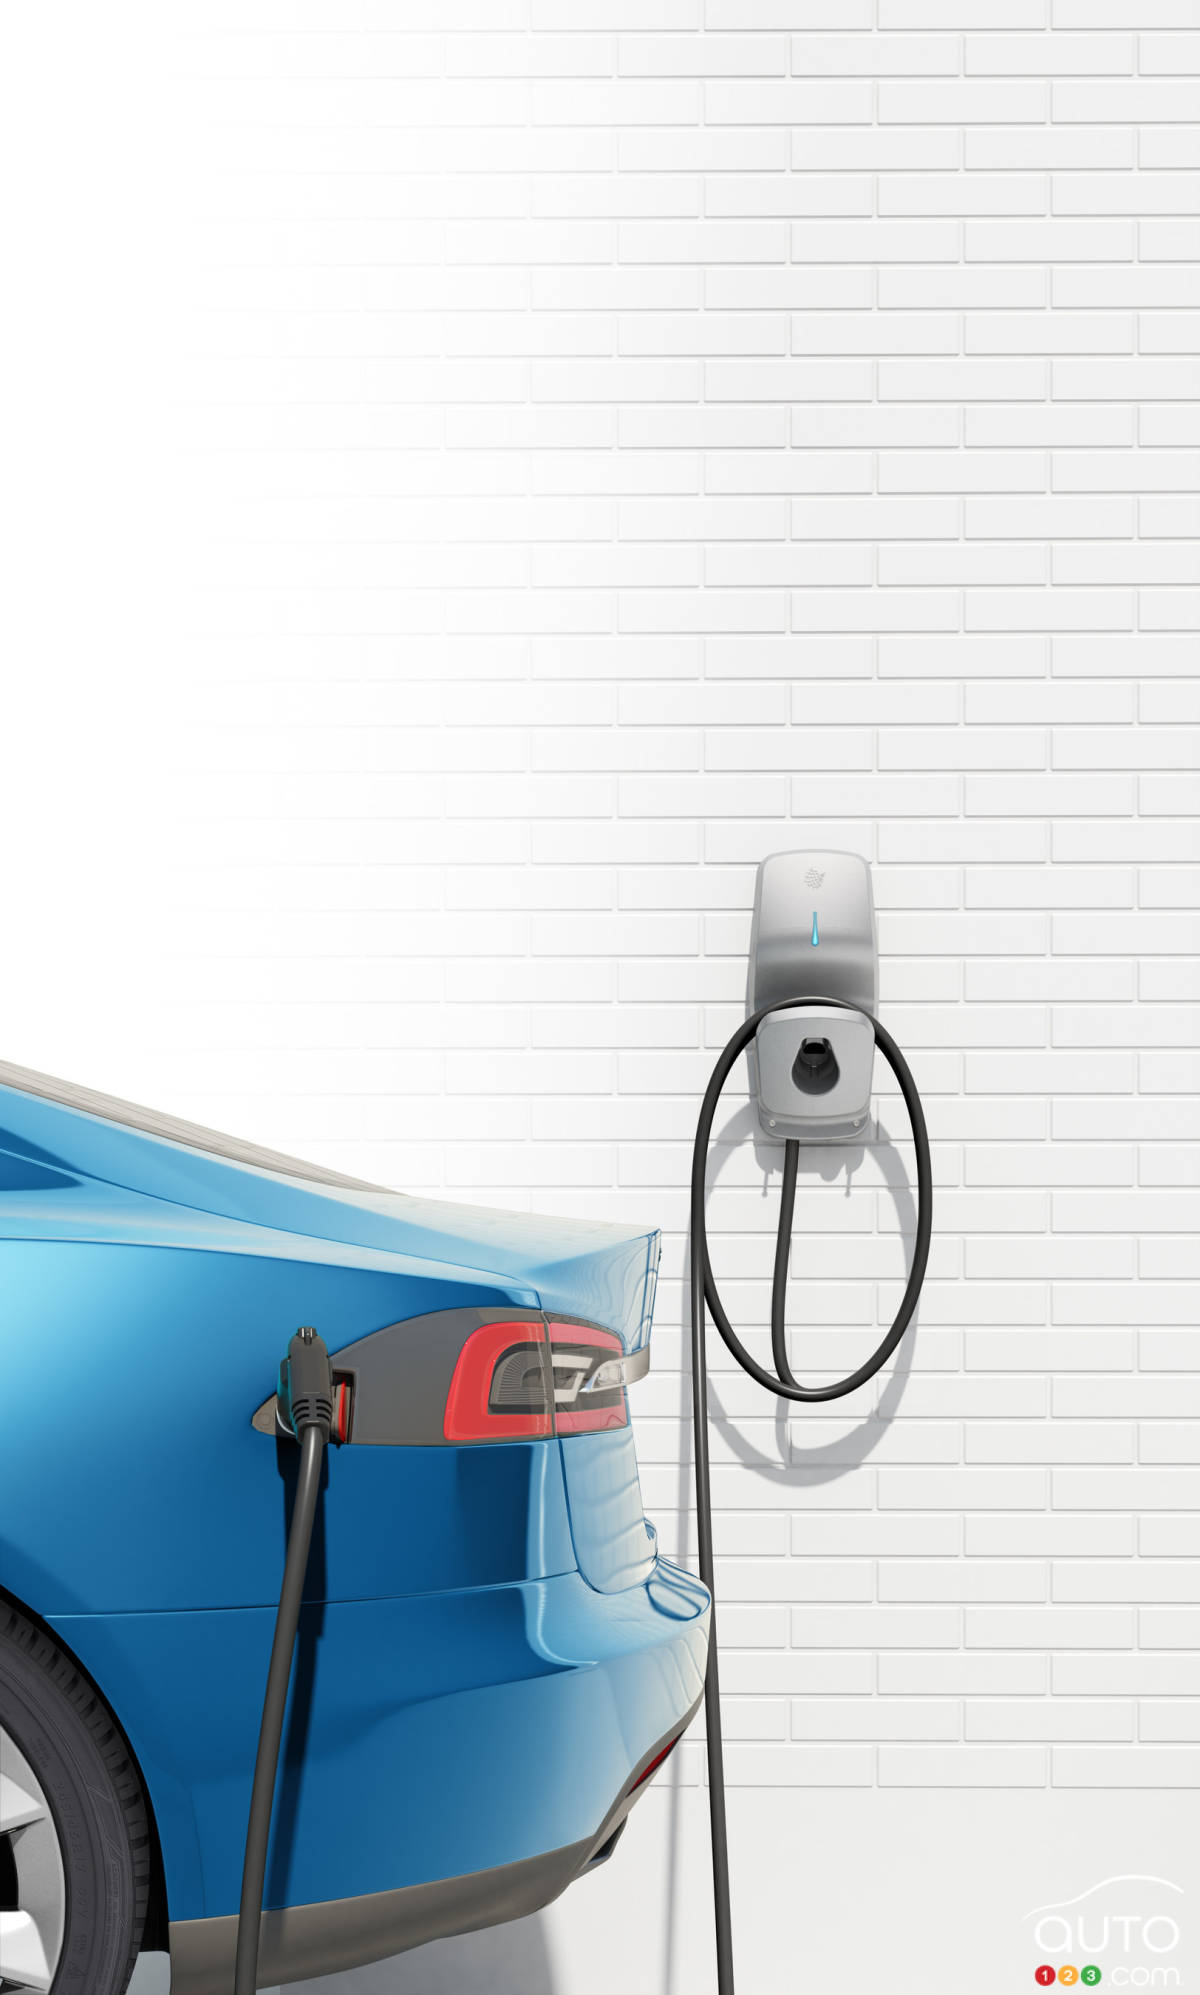 Canada’s largest EV charging network is launched